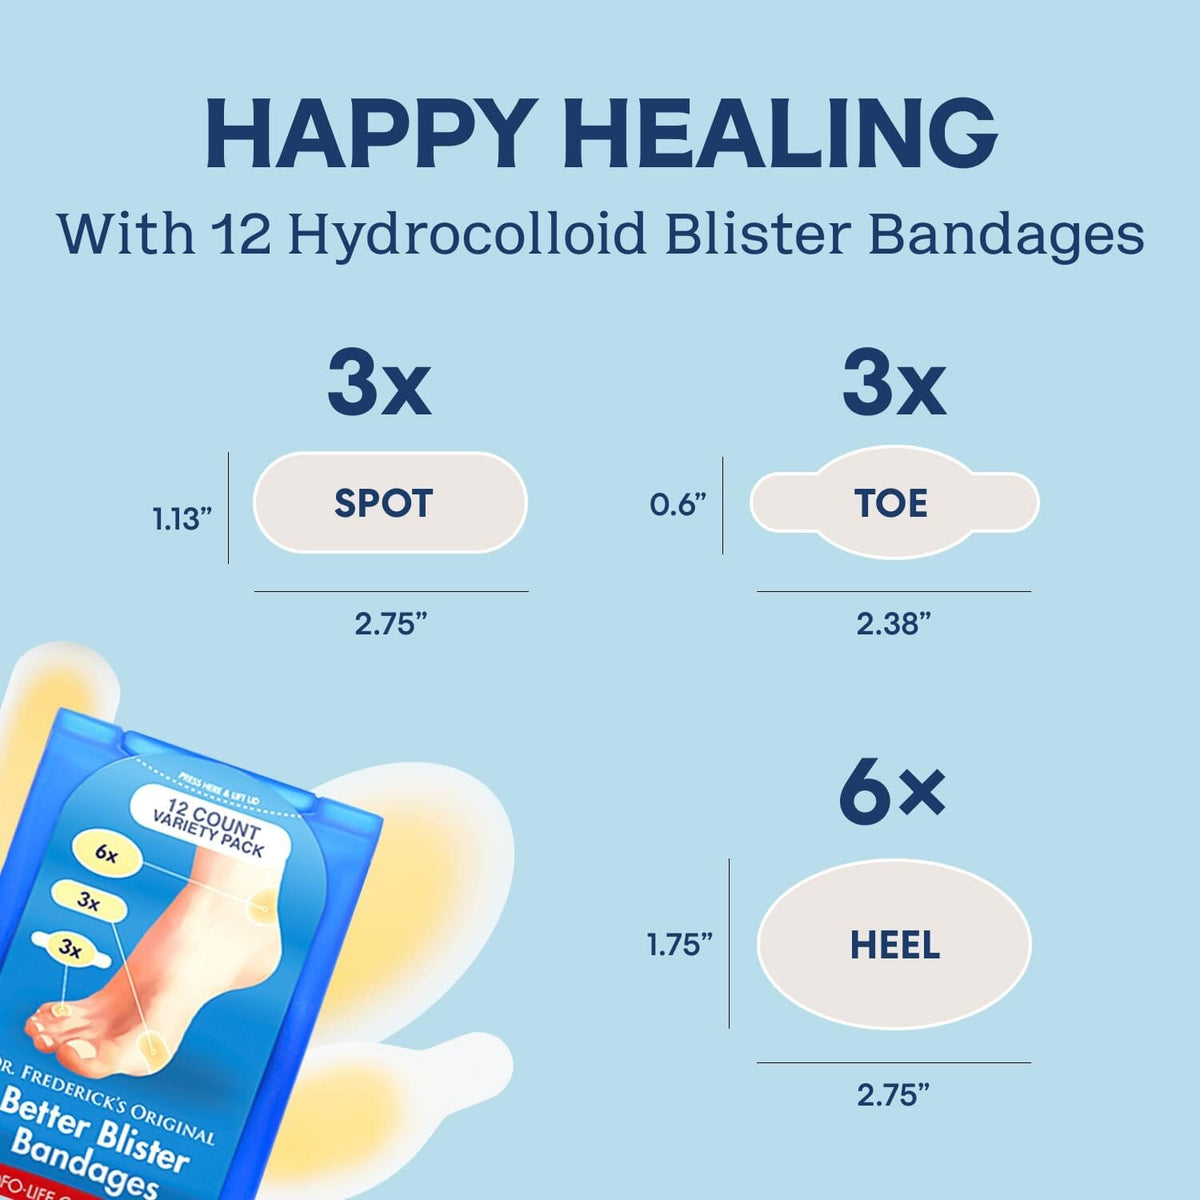 Dr. Frederick&#39;s Original Better Blister Bandages - Water Resistant - 25% More Cushioning - Hydrocolloid Bandages for Foot, Toe, &amp; Heel - Blister Pads for Prevention &amp; Recovery Foot Pain Dr. Frederick&#39;s Original 